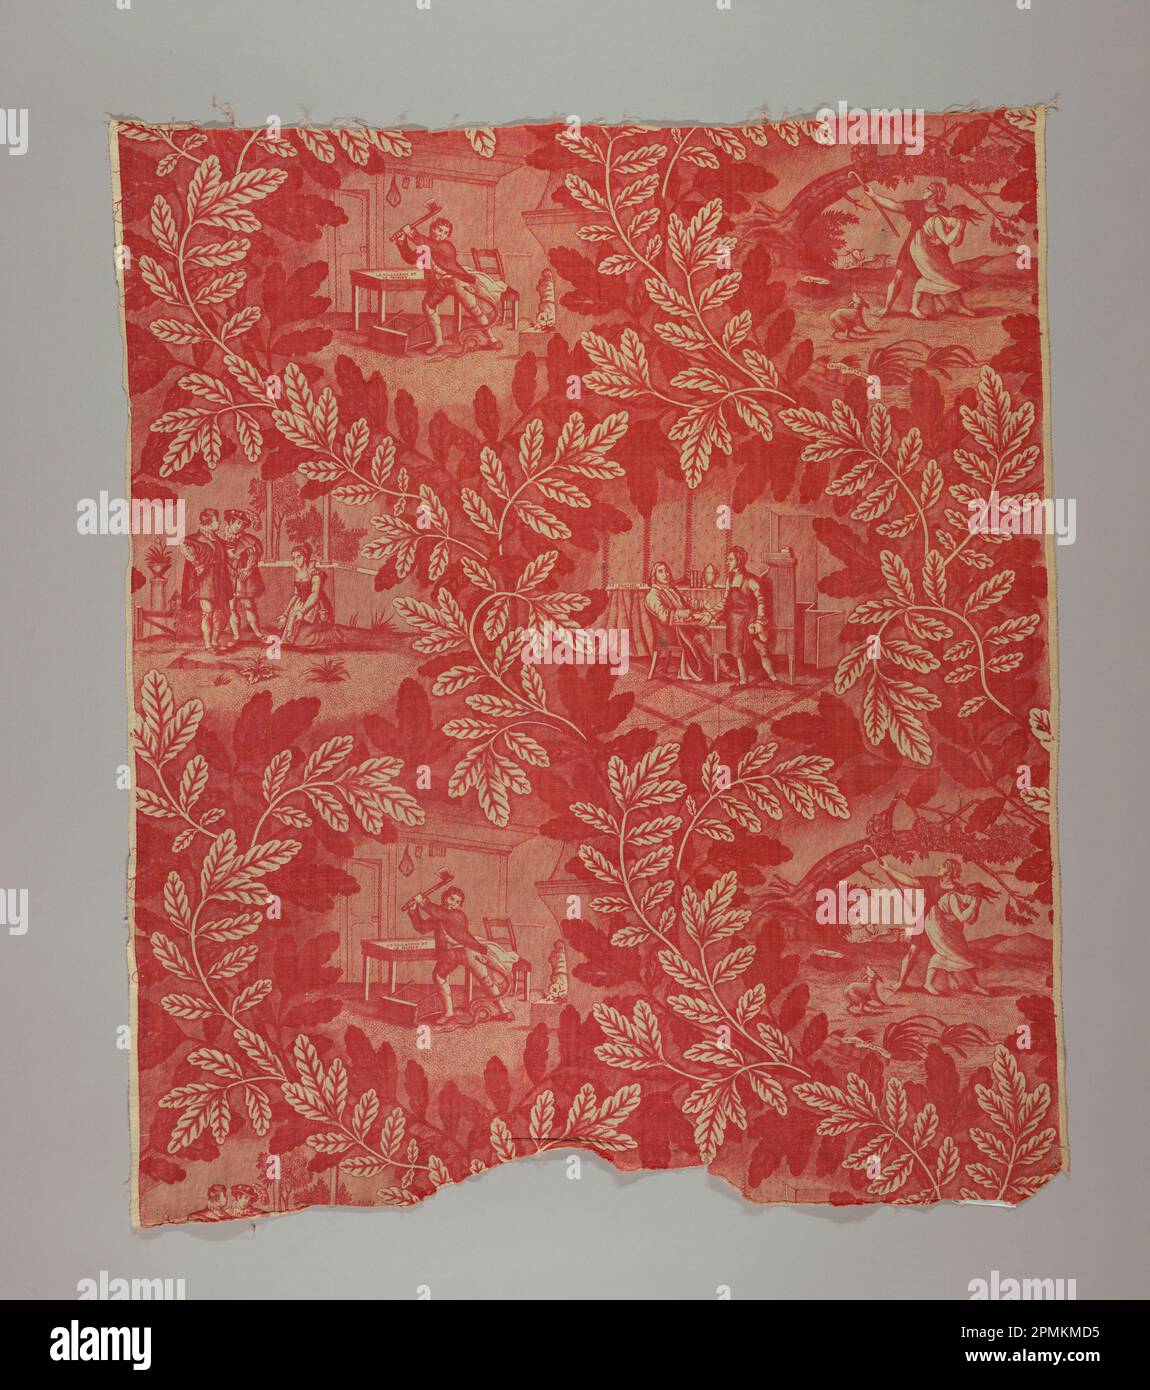 Textile, Fables of Fontaine; France; cotton; Warp x Weft: 93 x 79 cm (36 5/8 x 31 1/8 in.) Repeat H: 56.5 cm (22 1/4 in.) Width of roller: 77 cm (30 1/4 in.); Bequest of Elinor Merrell; 1995-50-166 Stock Photo